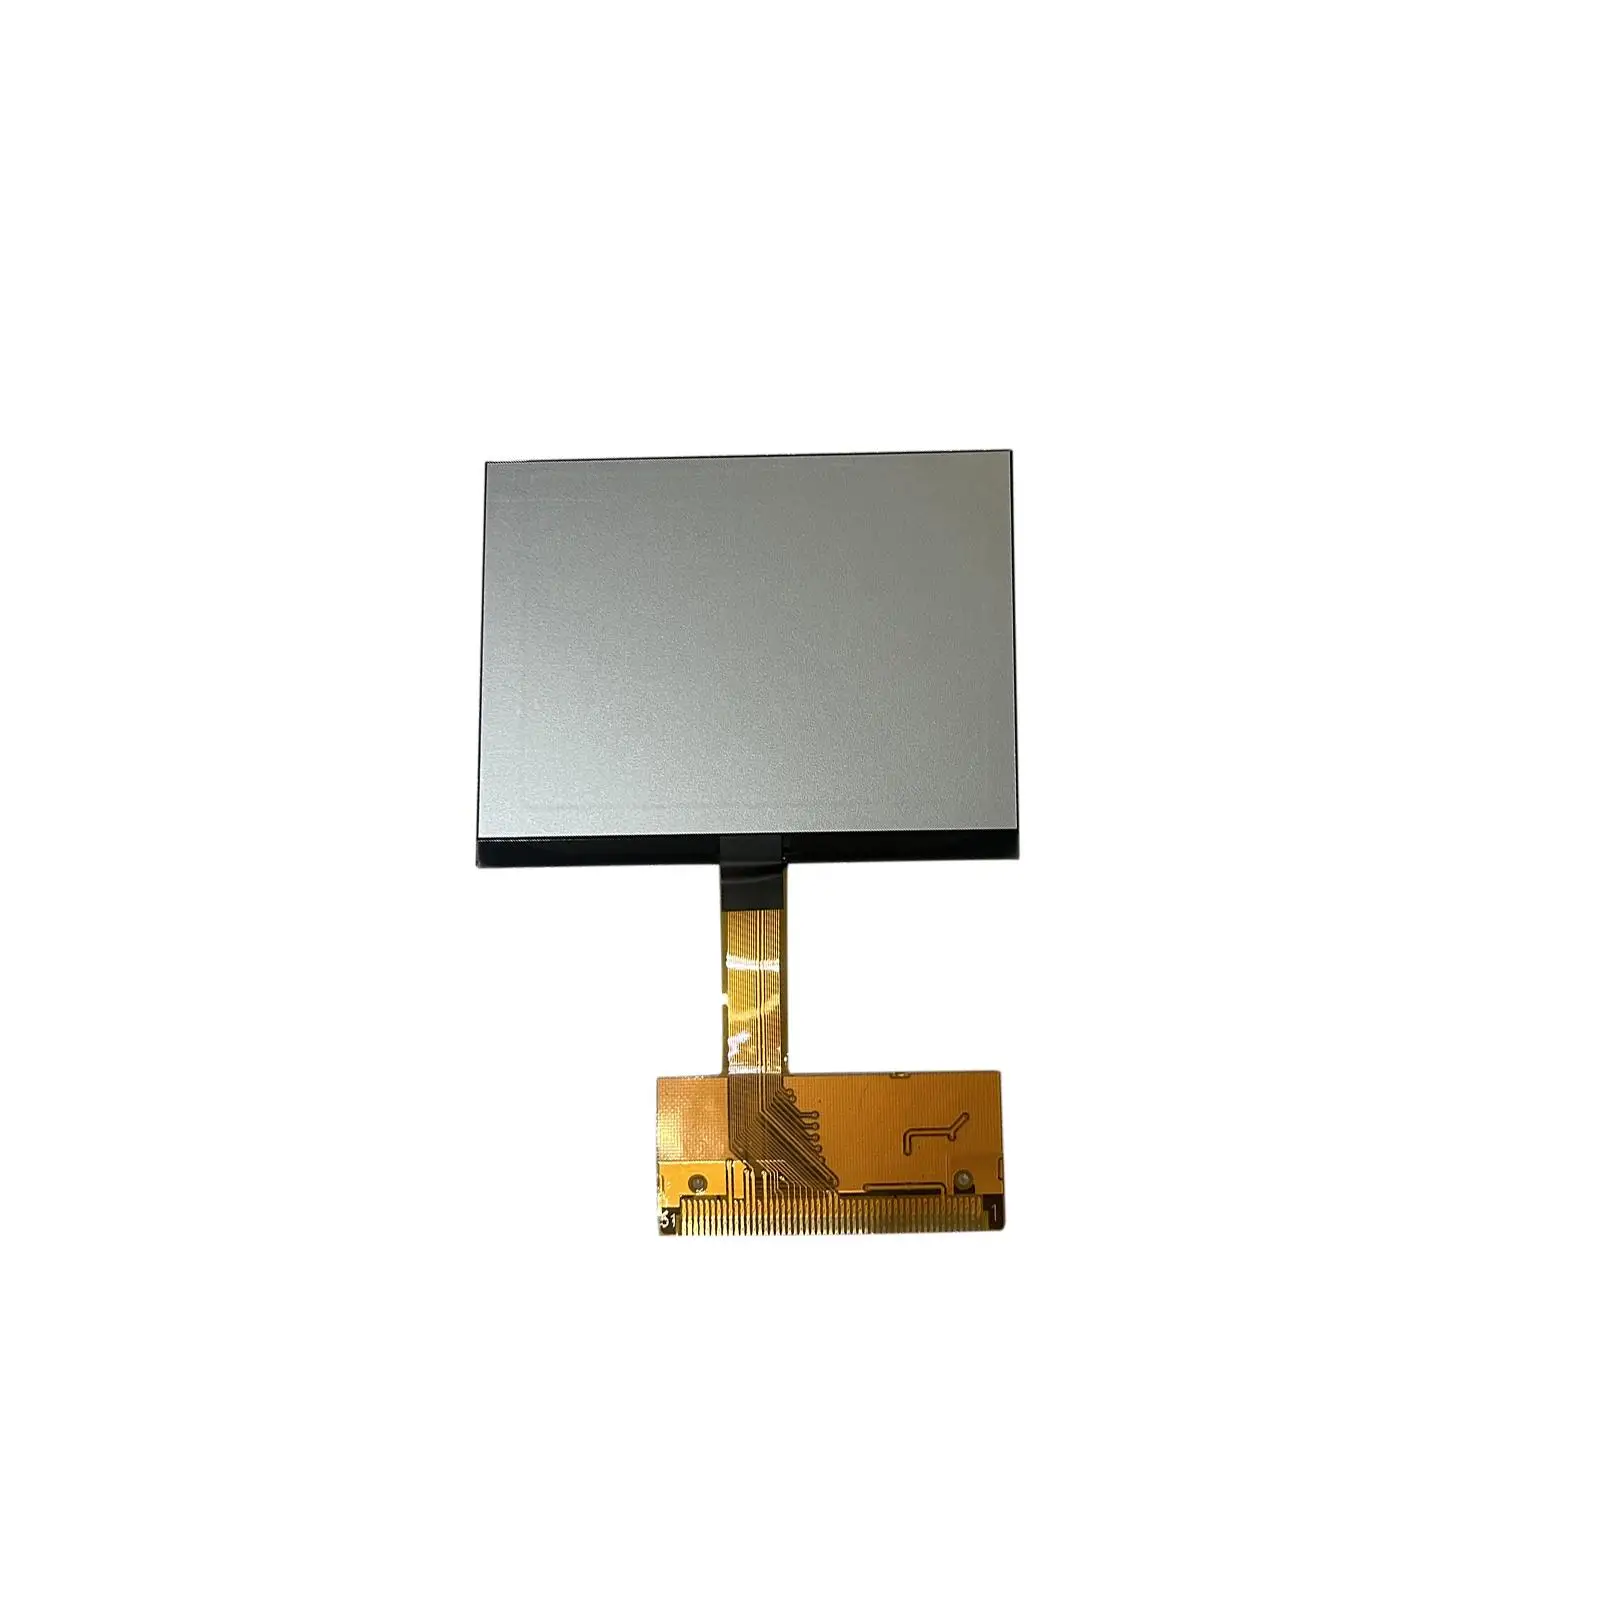 LCD Display Replacement Durable Professional Automobile Repairing Accessory for A3 A4 Good Performance 7.5cmx6cm Easily Install